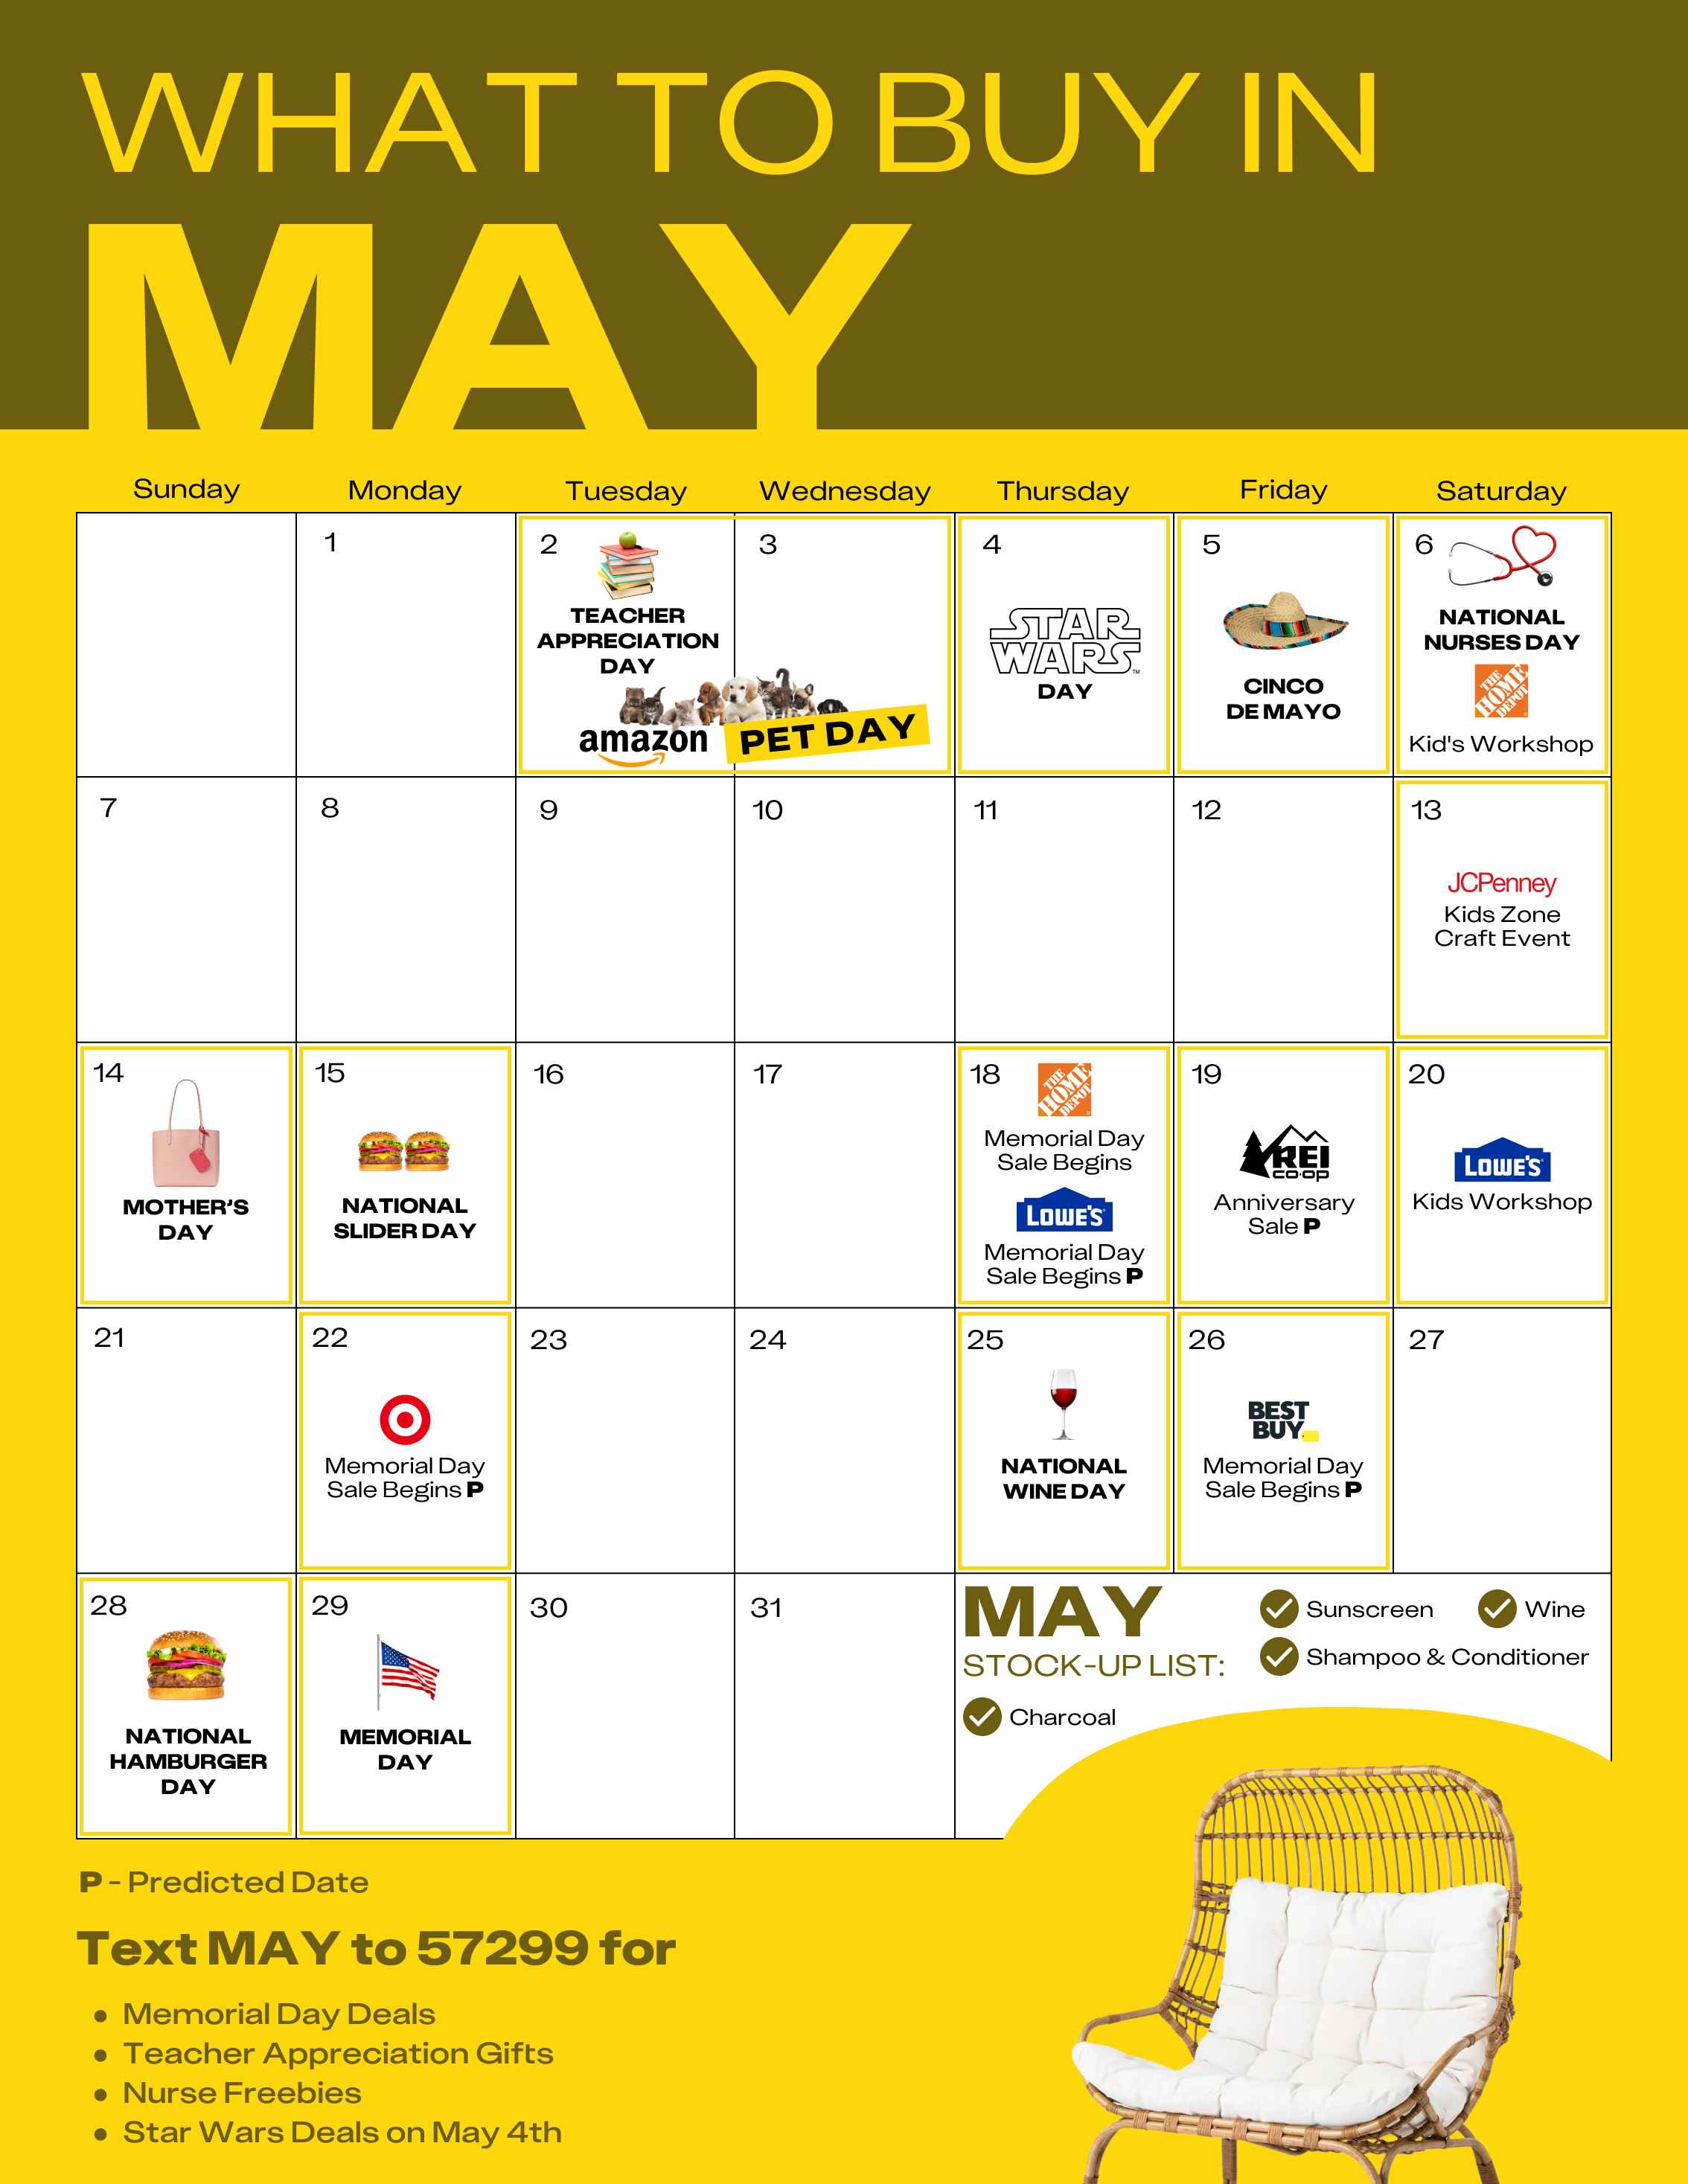 https://prod-cdn-thekrazycouponlady.imgix.net/wp-content/uploads/2017/04/may-calendar-1682714988-1682714988.png?auto=format&fit=fill&q=25